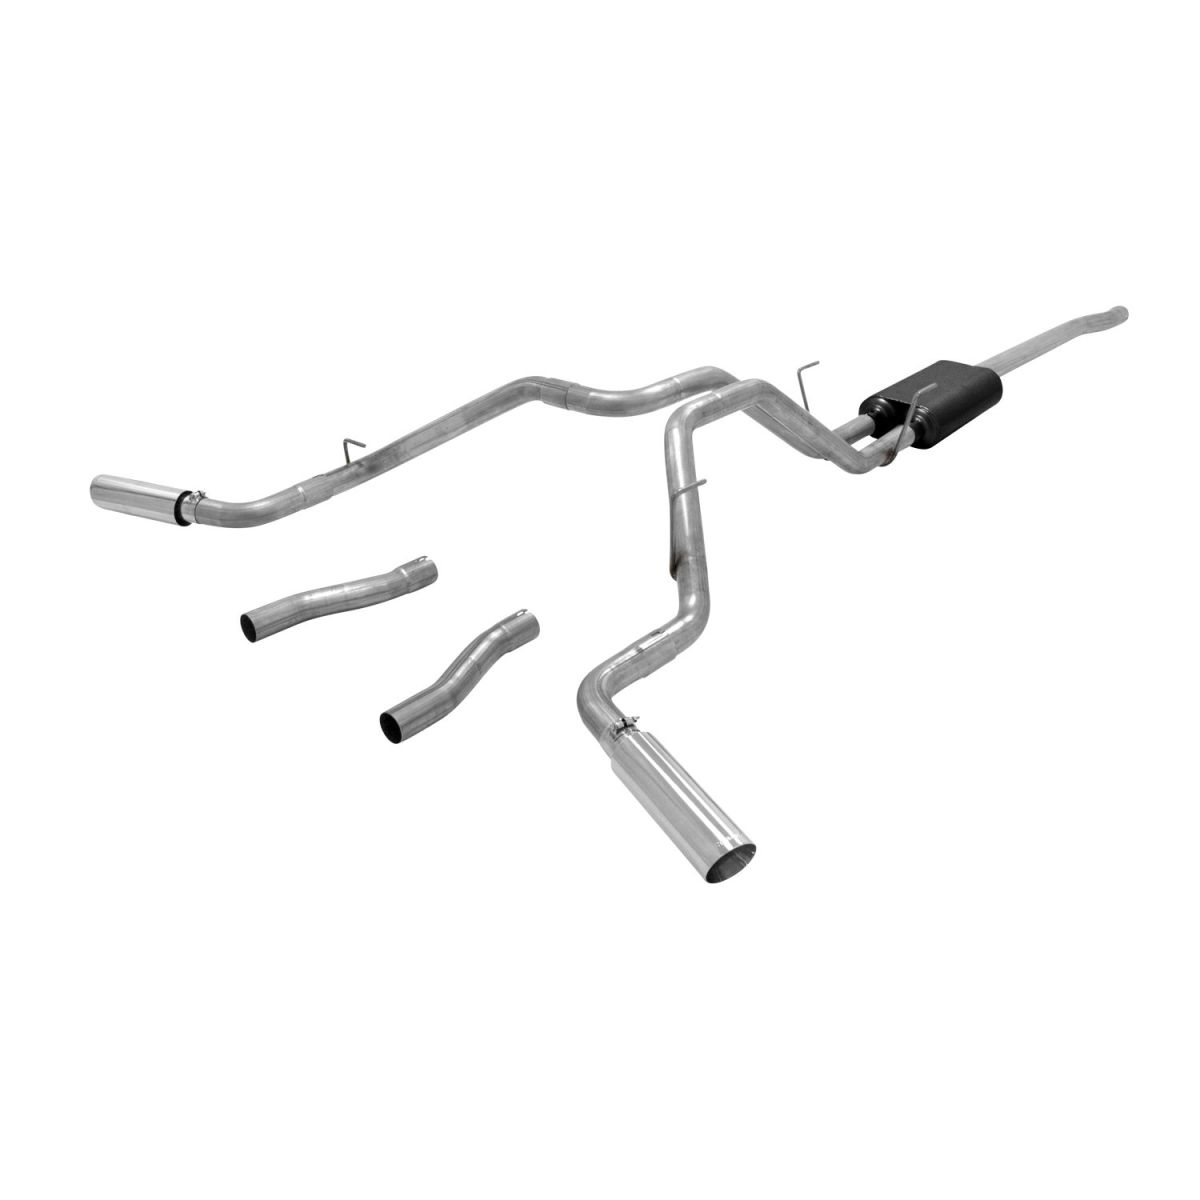 Flowmaster - Flowmaster American Thunder Cat-Back Exhaust For 14-18 Ram 2500 5.7L Crew Cab